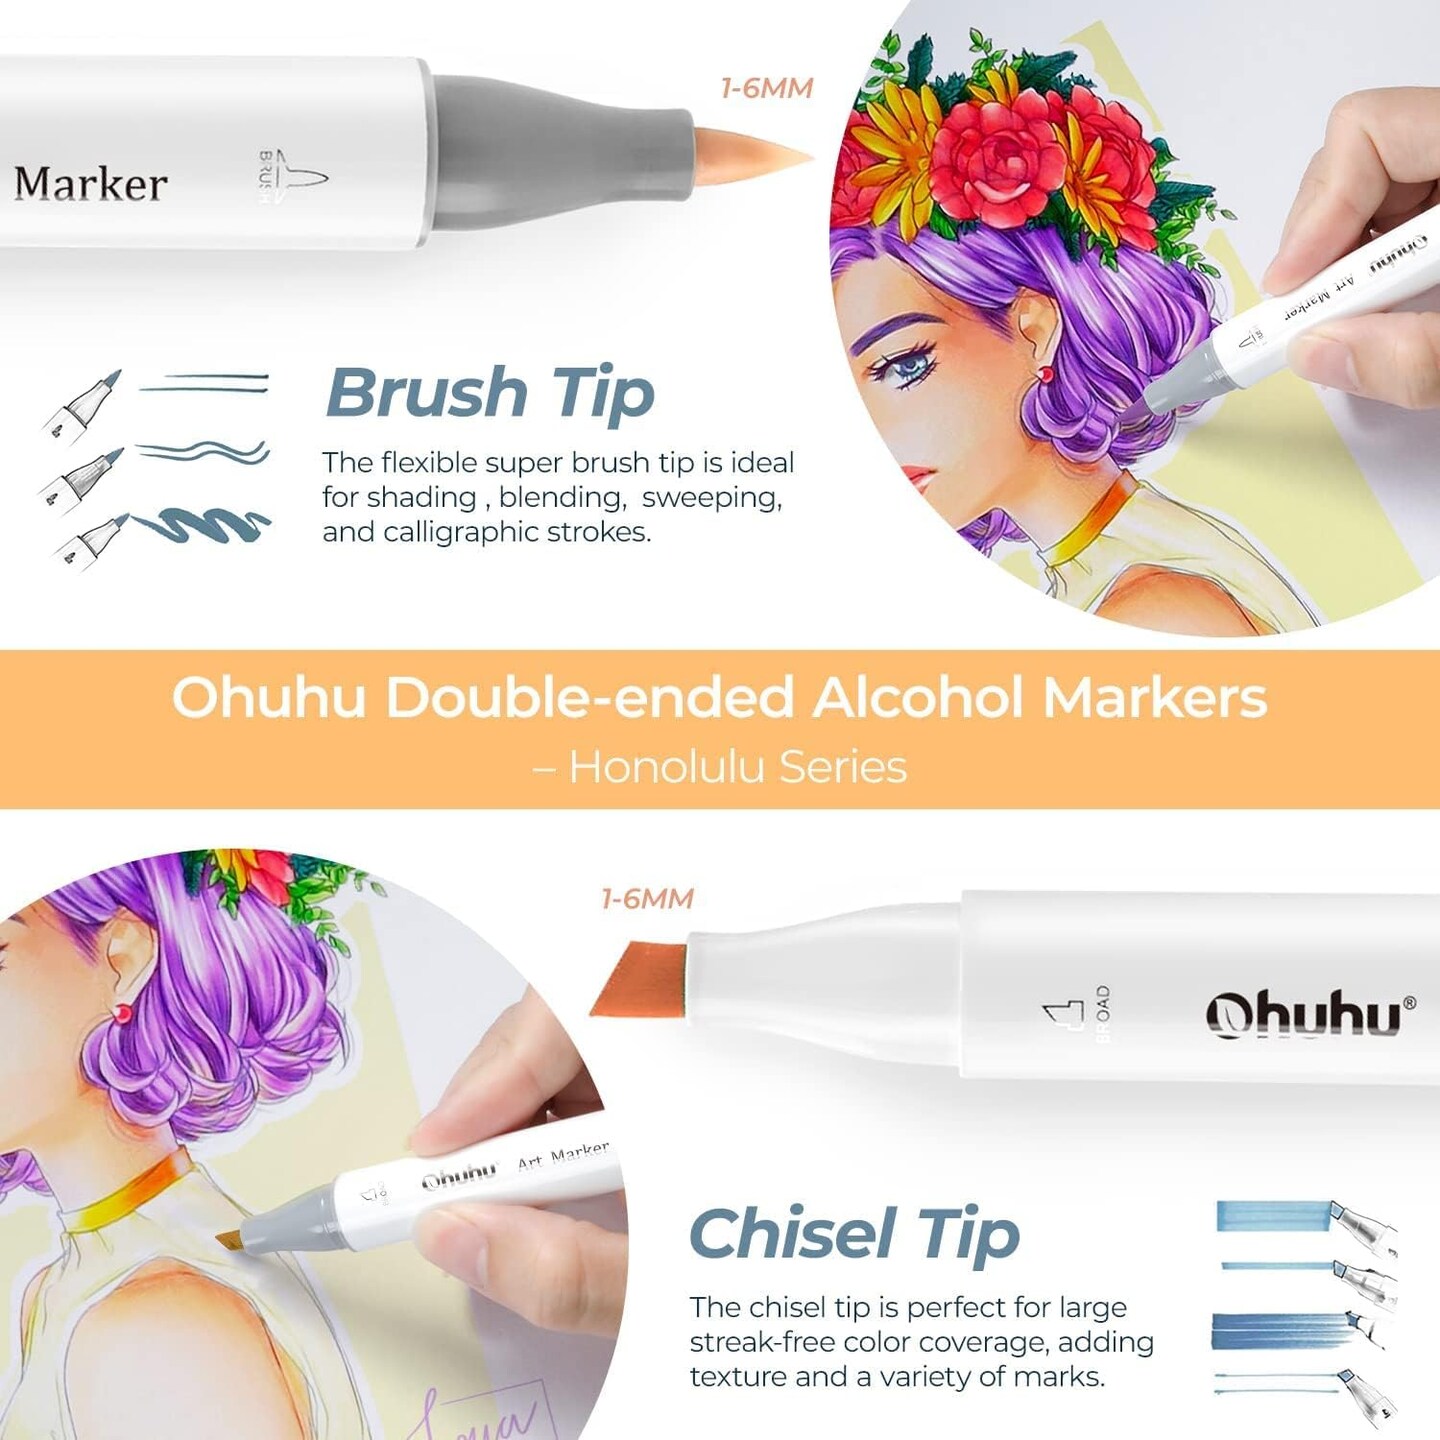 Ohuhu Alcohol Markers Brush Tip: Alcohol-based Refillable 48 Colors Double Tipped Art Marker Set for Artist Adults Coloring Sketch Illustrations - Brush Chisel Dual Tips - Honolulu of Ohuhu Markers